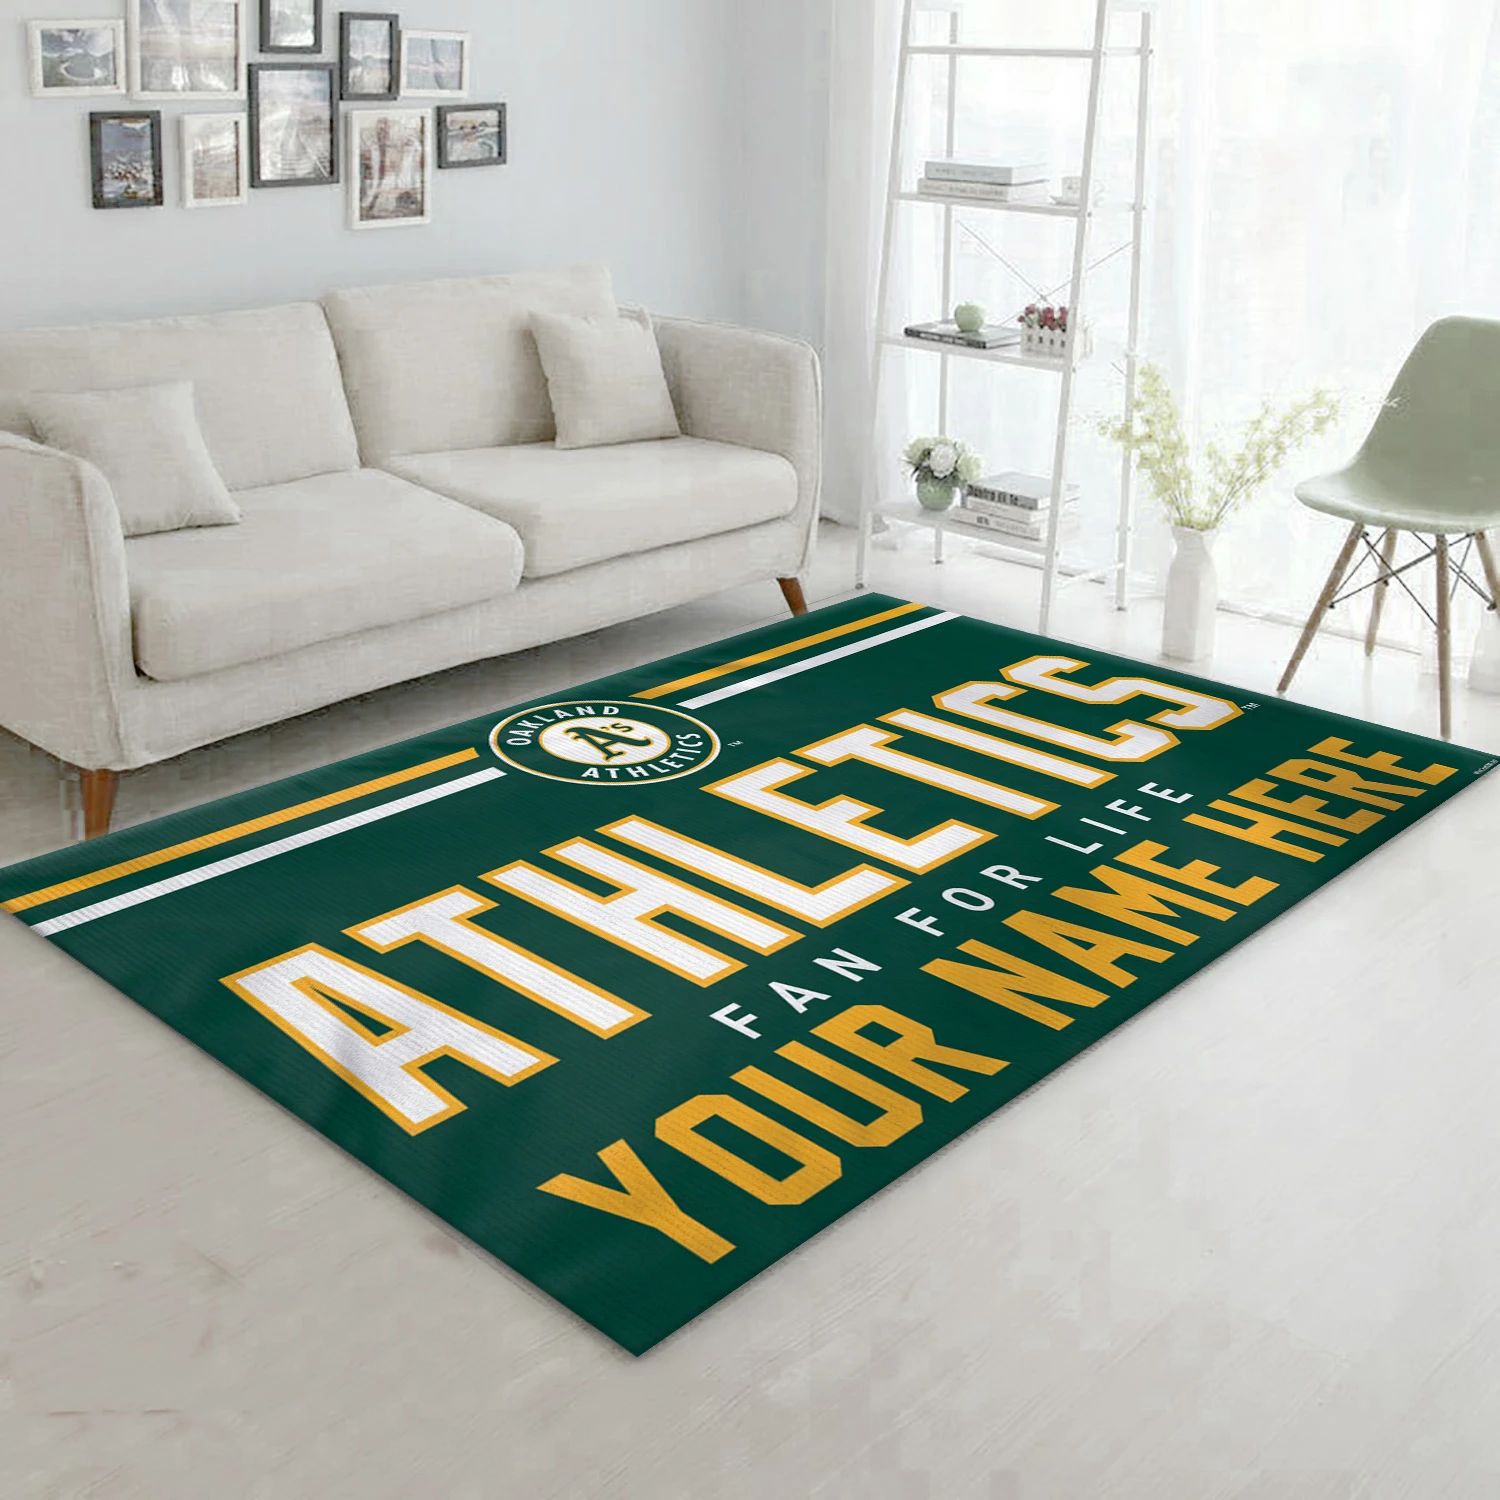 Oakland Athletics Personalized MLB Reangle Area Rug, Living Room Rug - Home Decor - Indoor Outdoor Rugs